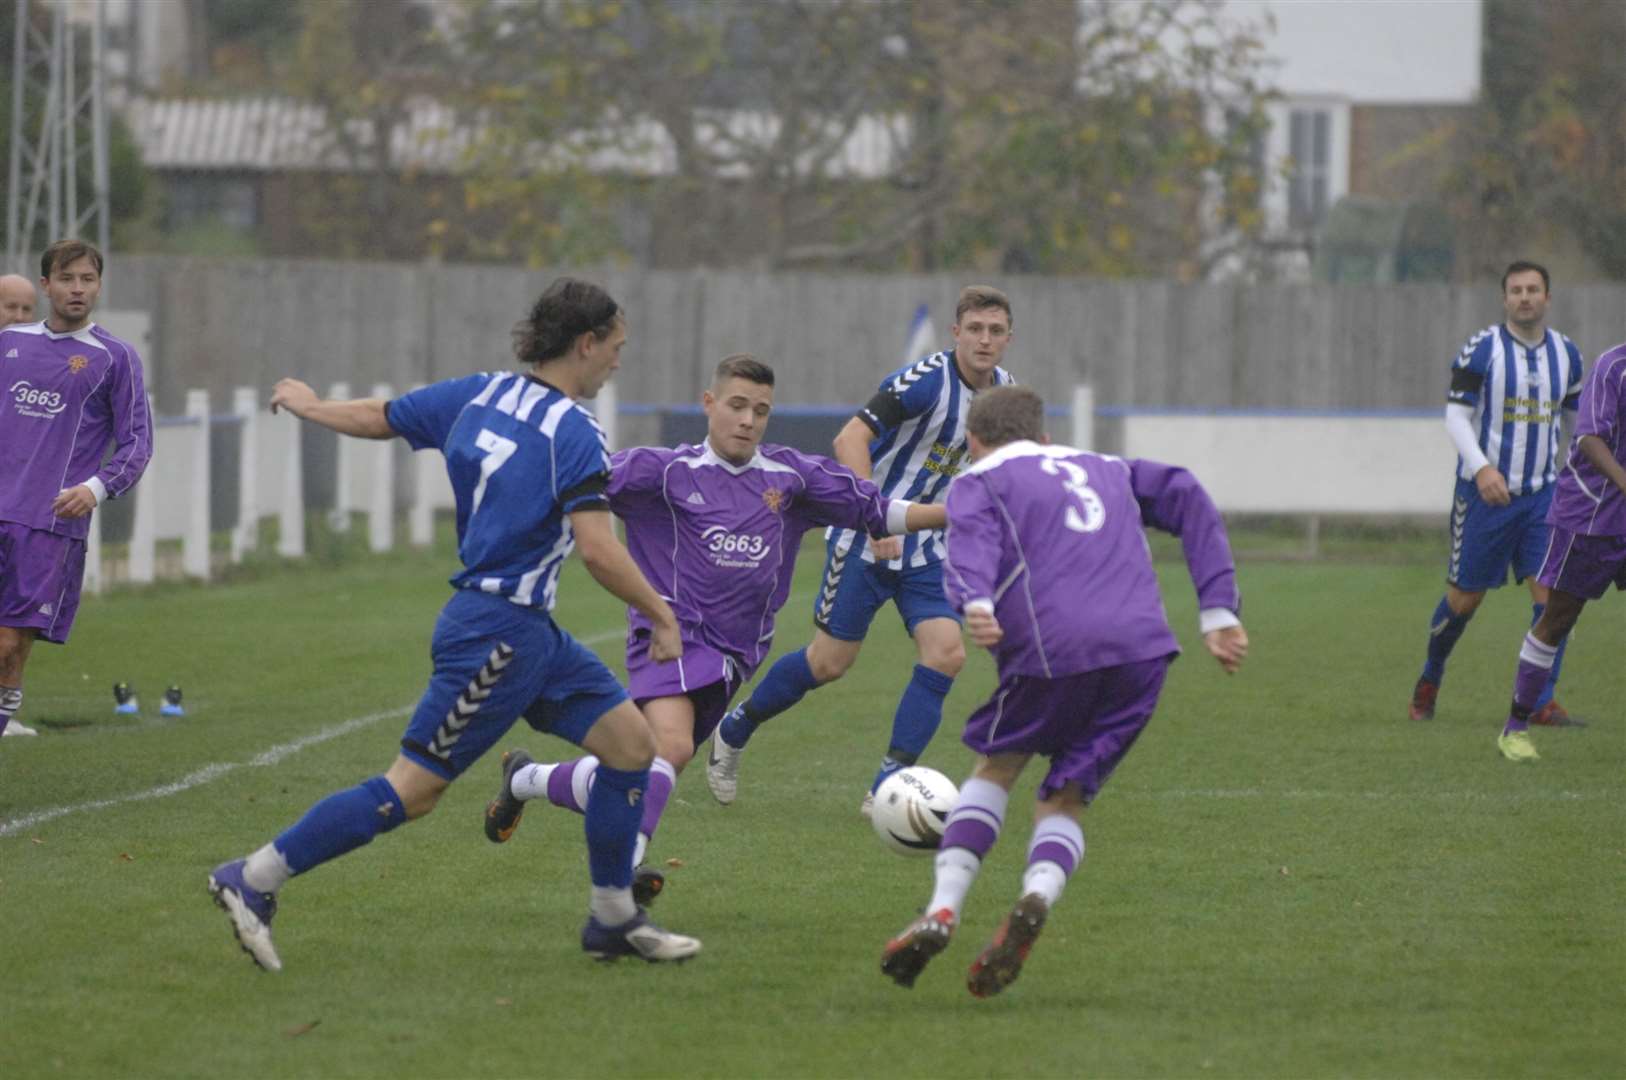 Herne Bay's match with Sevenoaks at Winch's Field in November 2011 Picture: Chris Davey